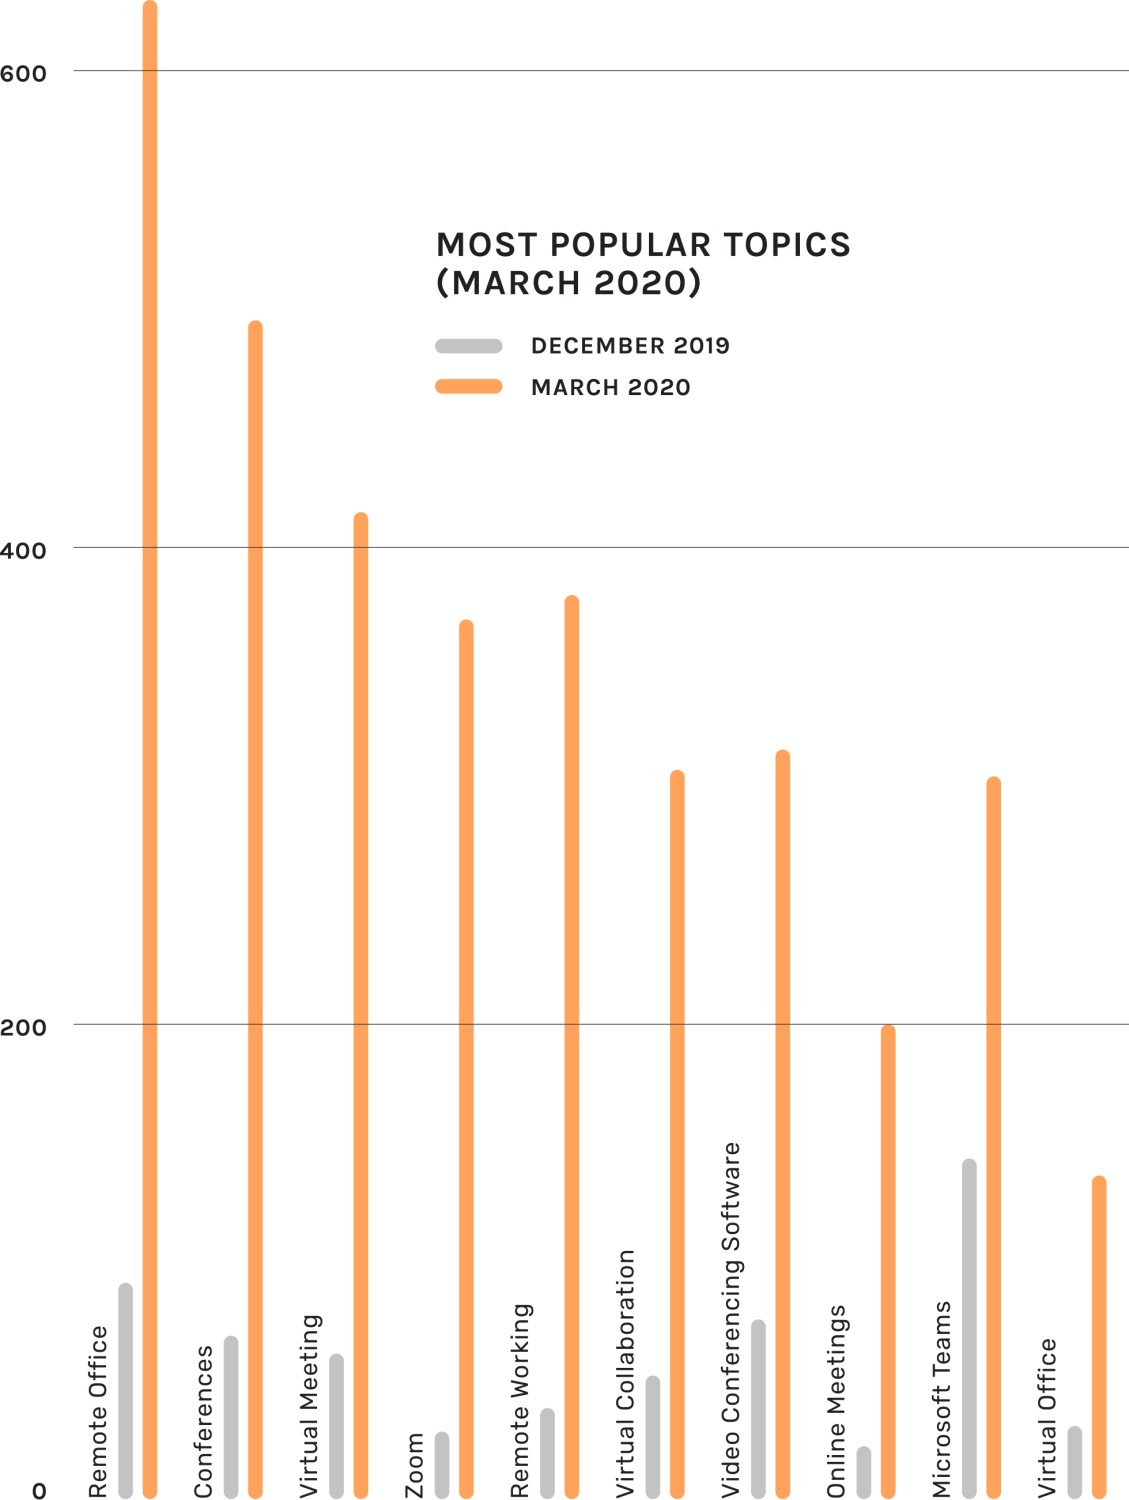 Most popular topics graph for March 2020